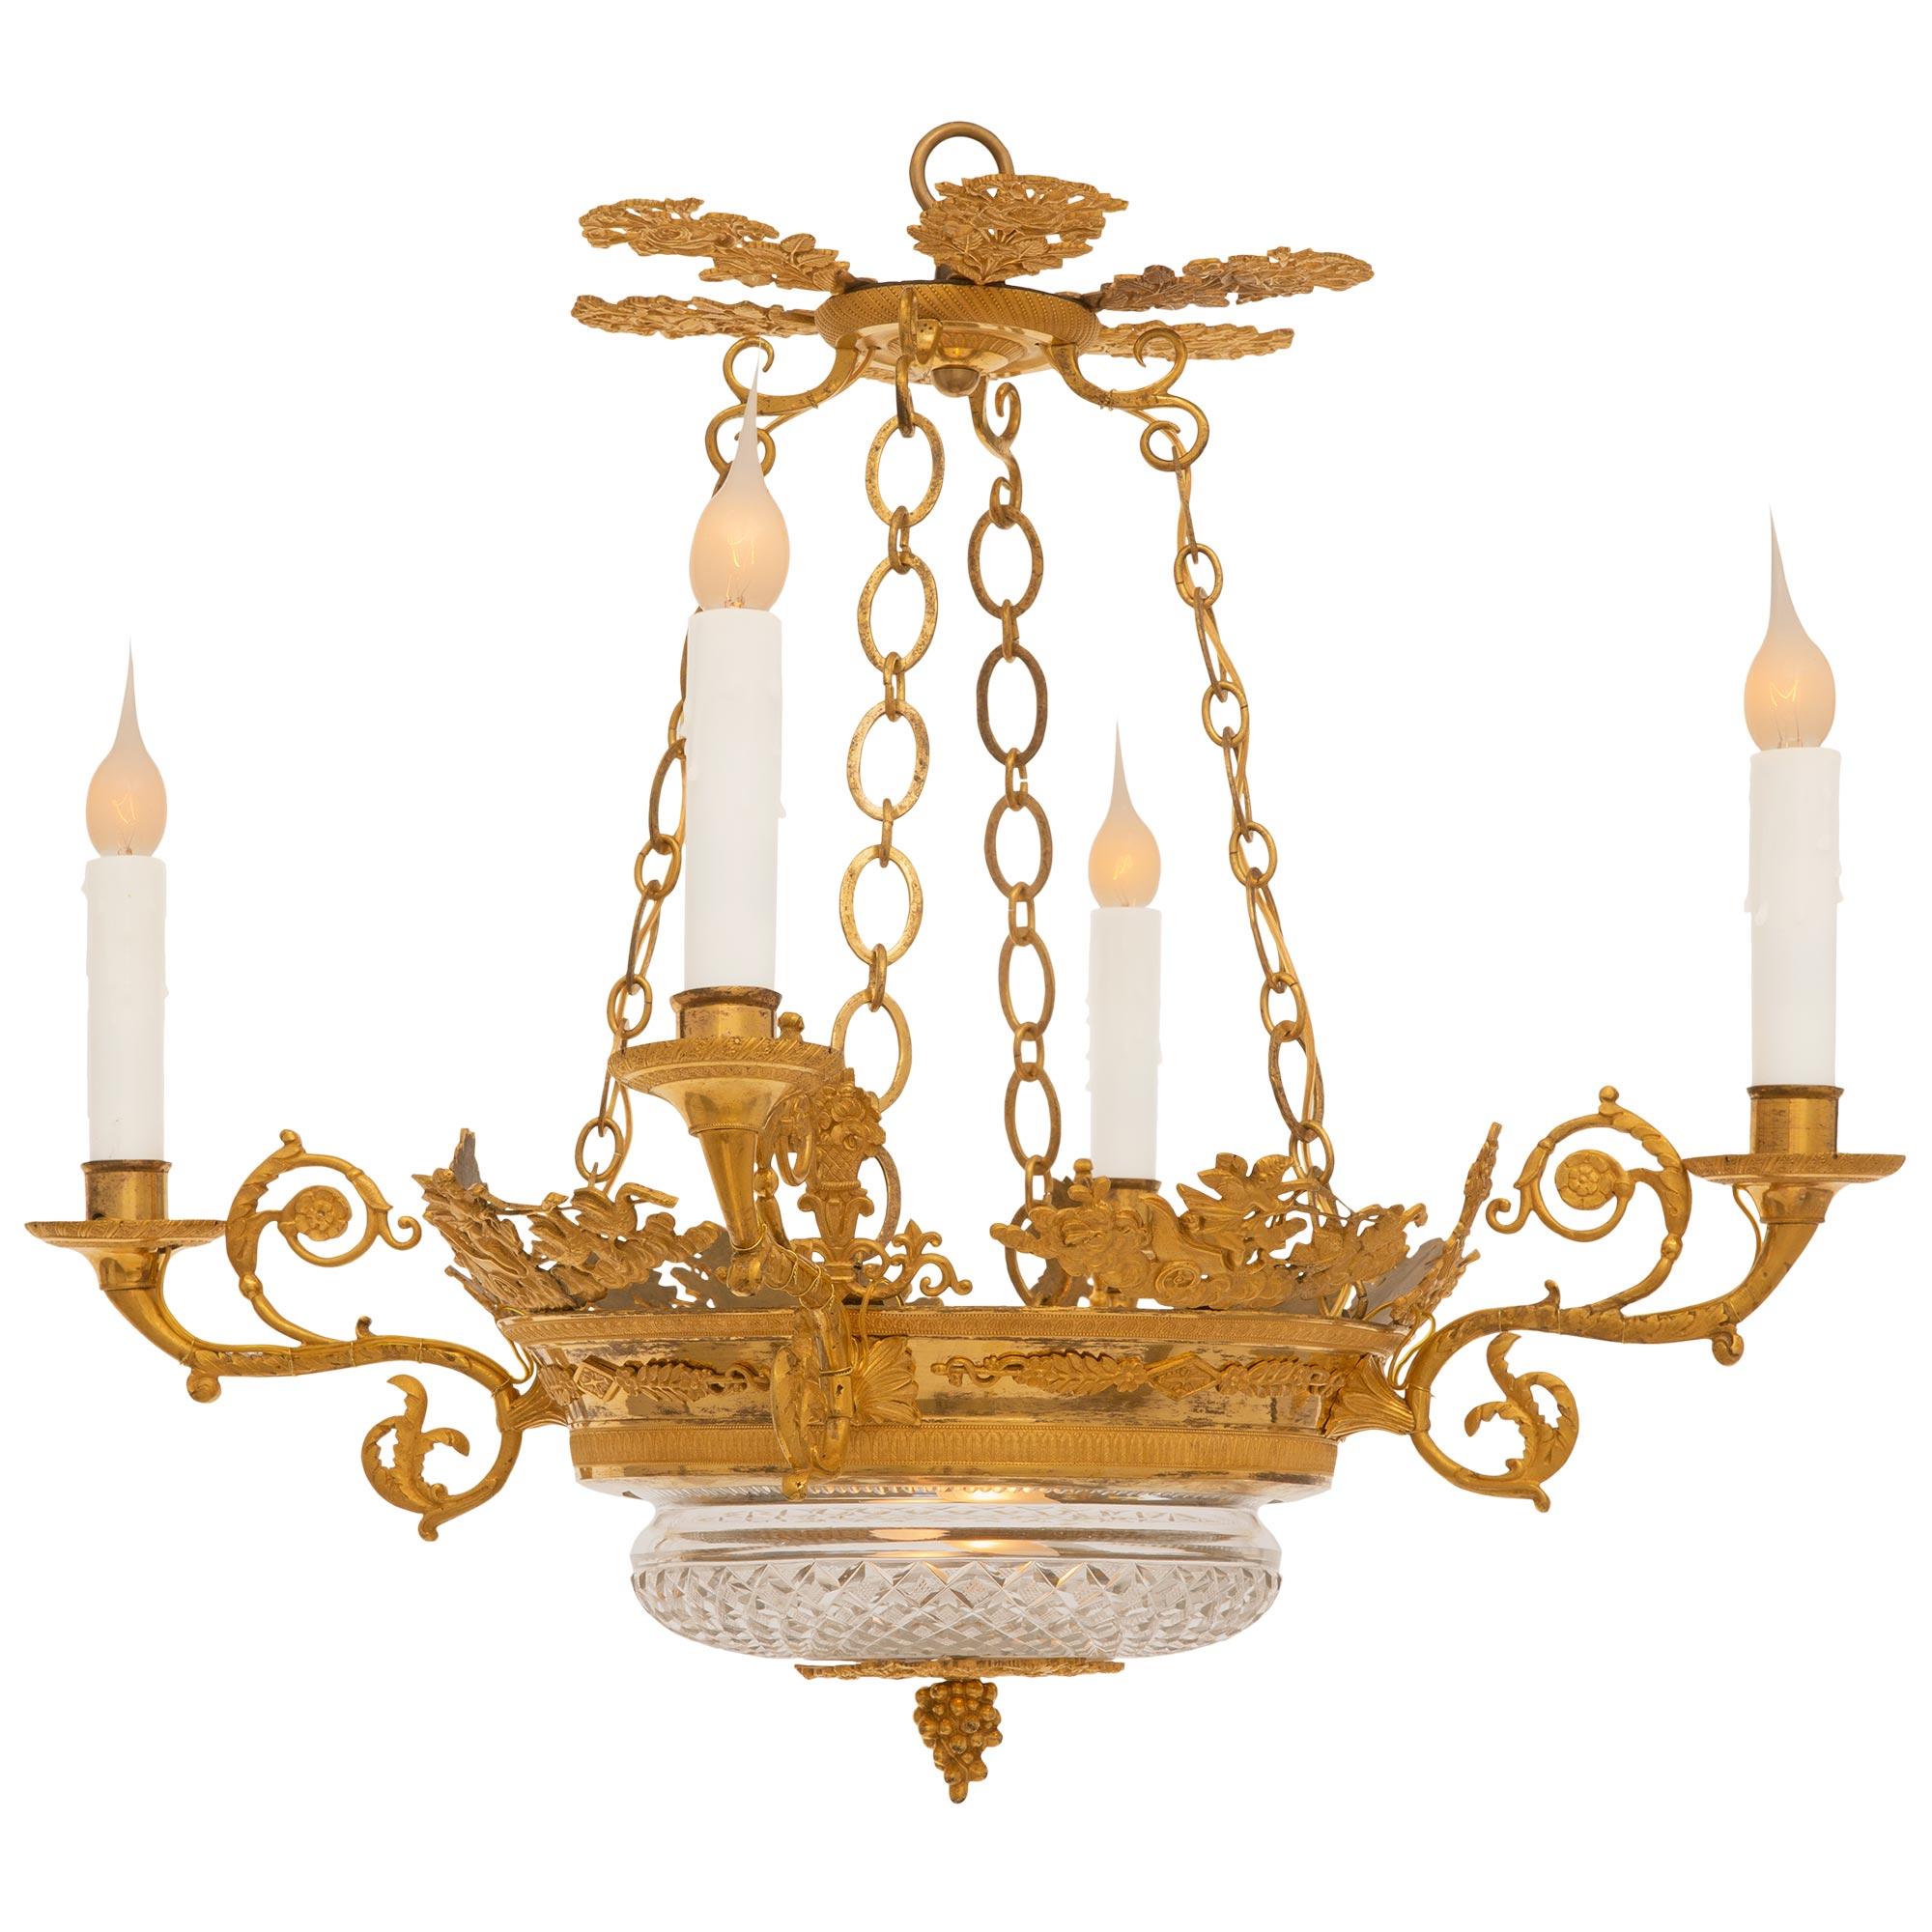 An attractive French 19th century Charles X period Ormolu and Crystal chandelier. The four arm chandelier has a bottom ormolu mount with designs of intertwined cornucopias filled with blossoming flowers and central finial. The mount above holds the